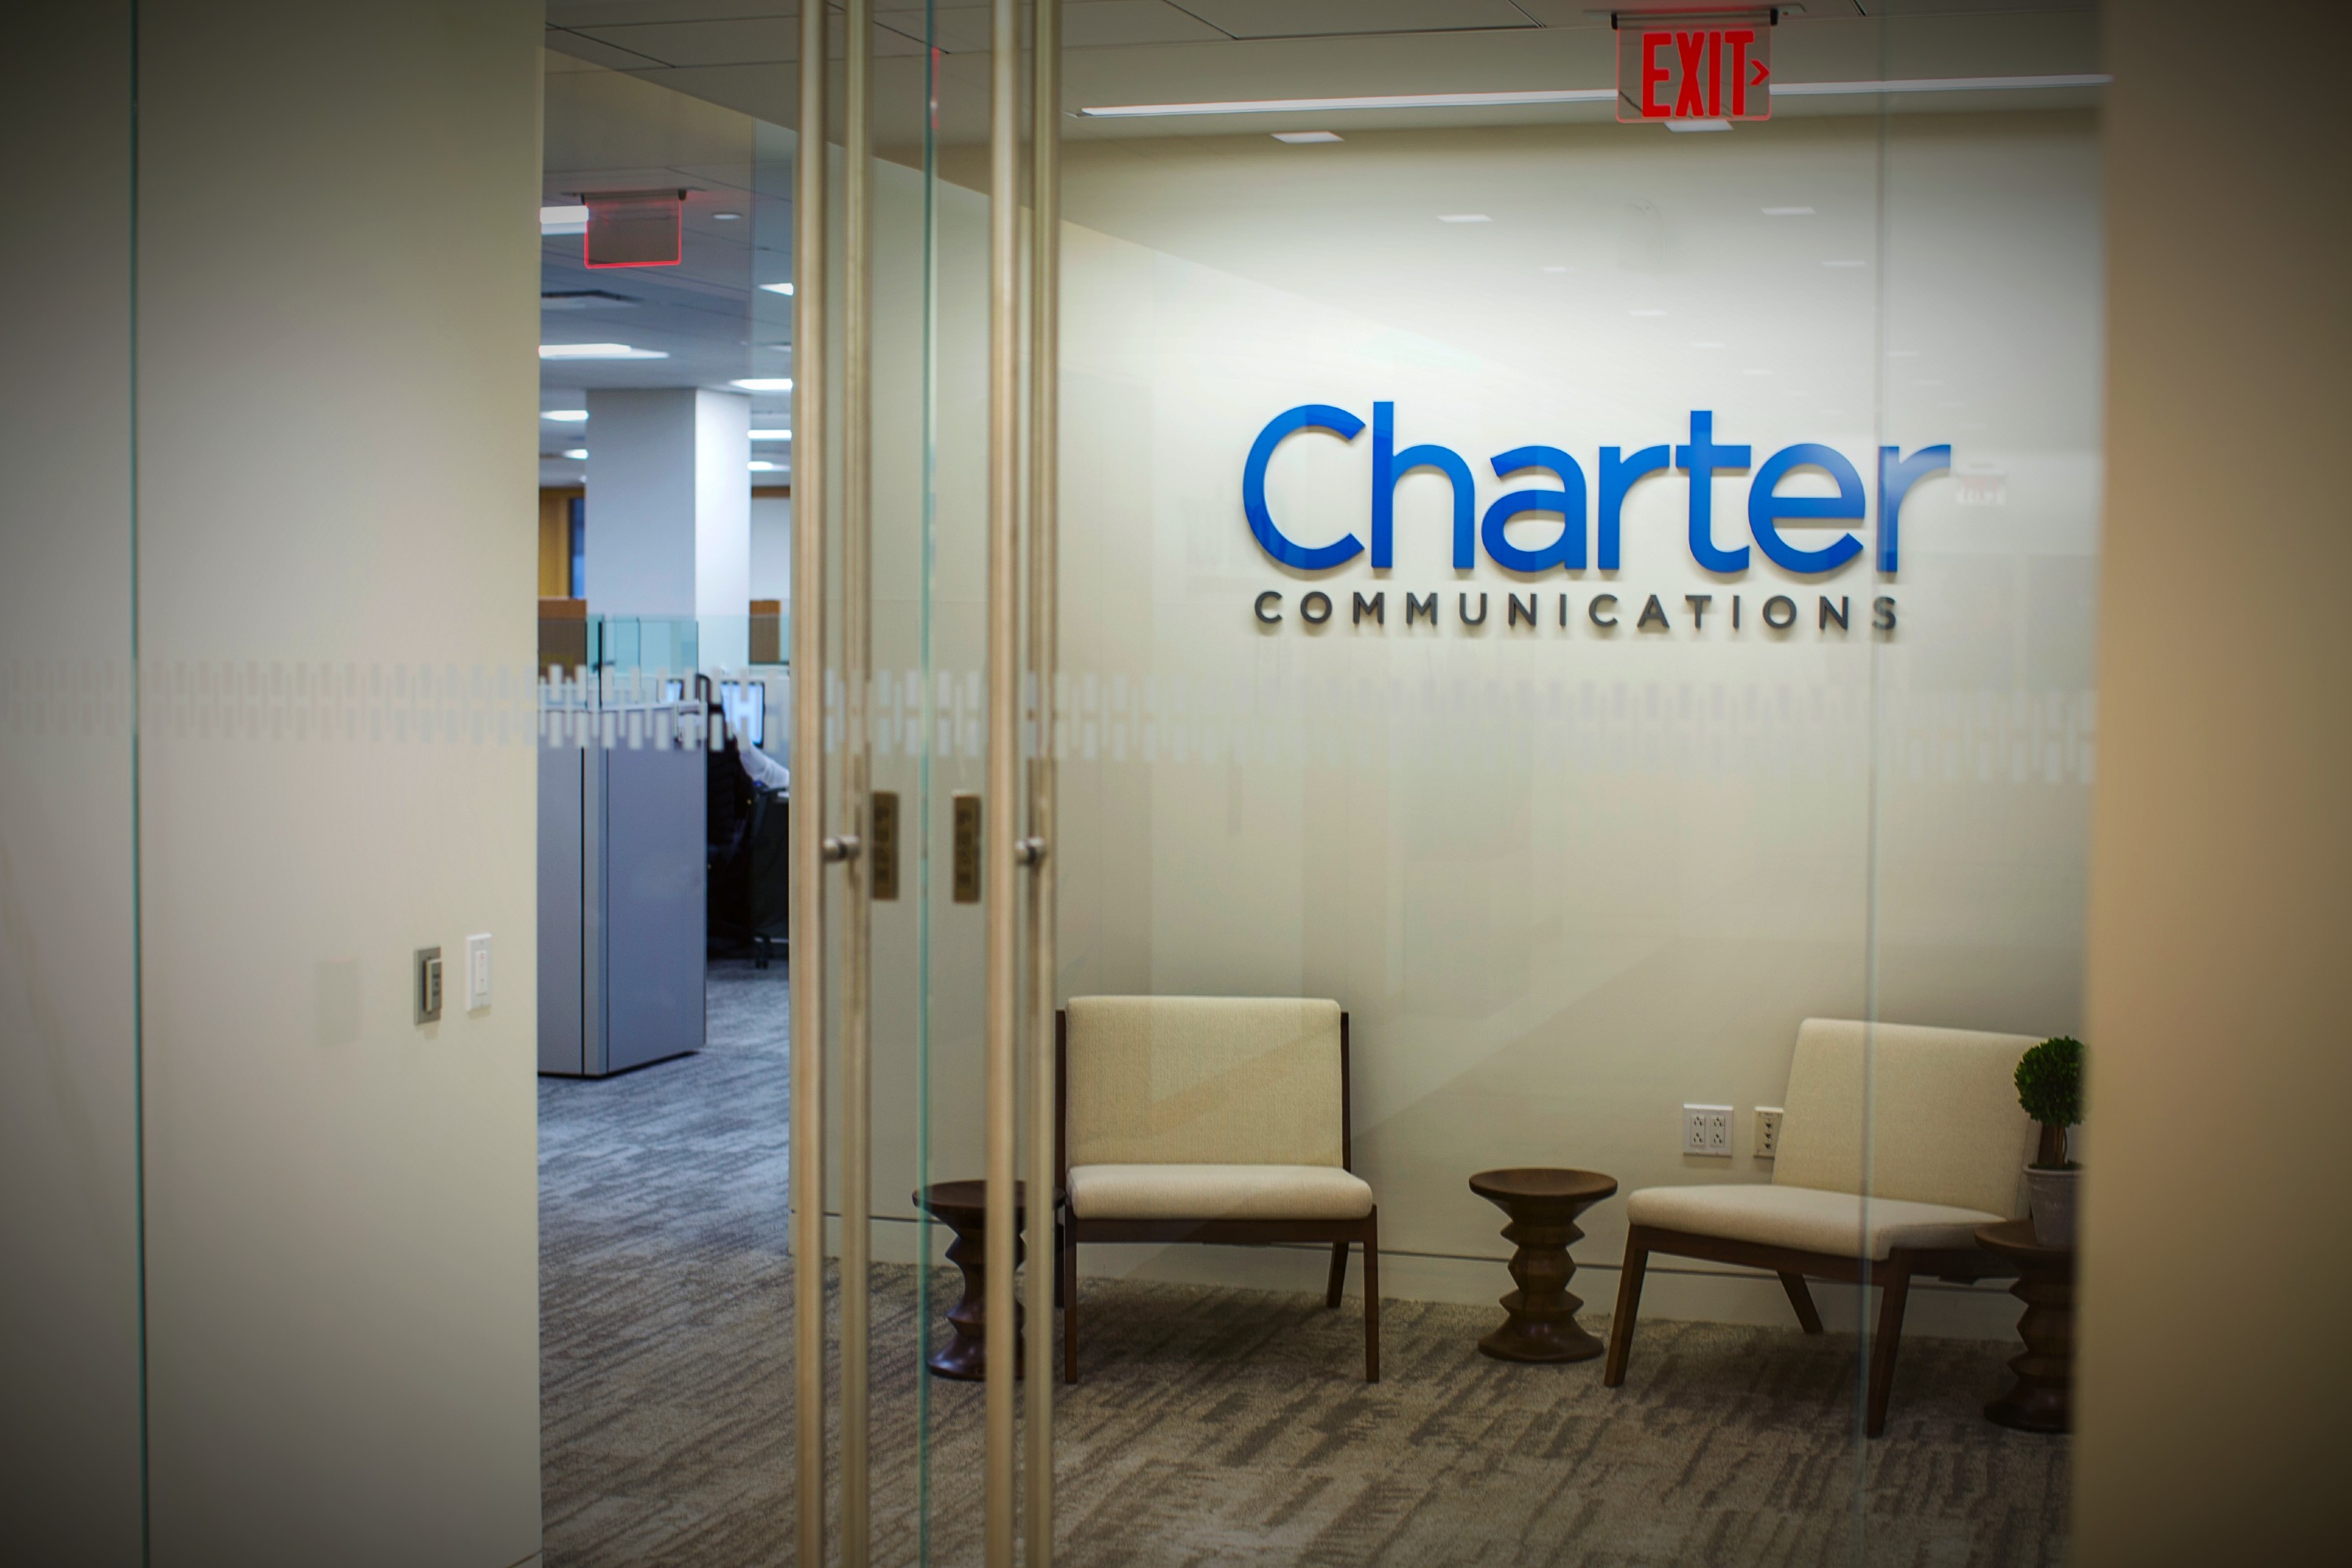 Charter staff told to report to offices despite positive coronavirus tests | TechCrunch